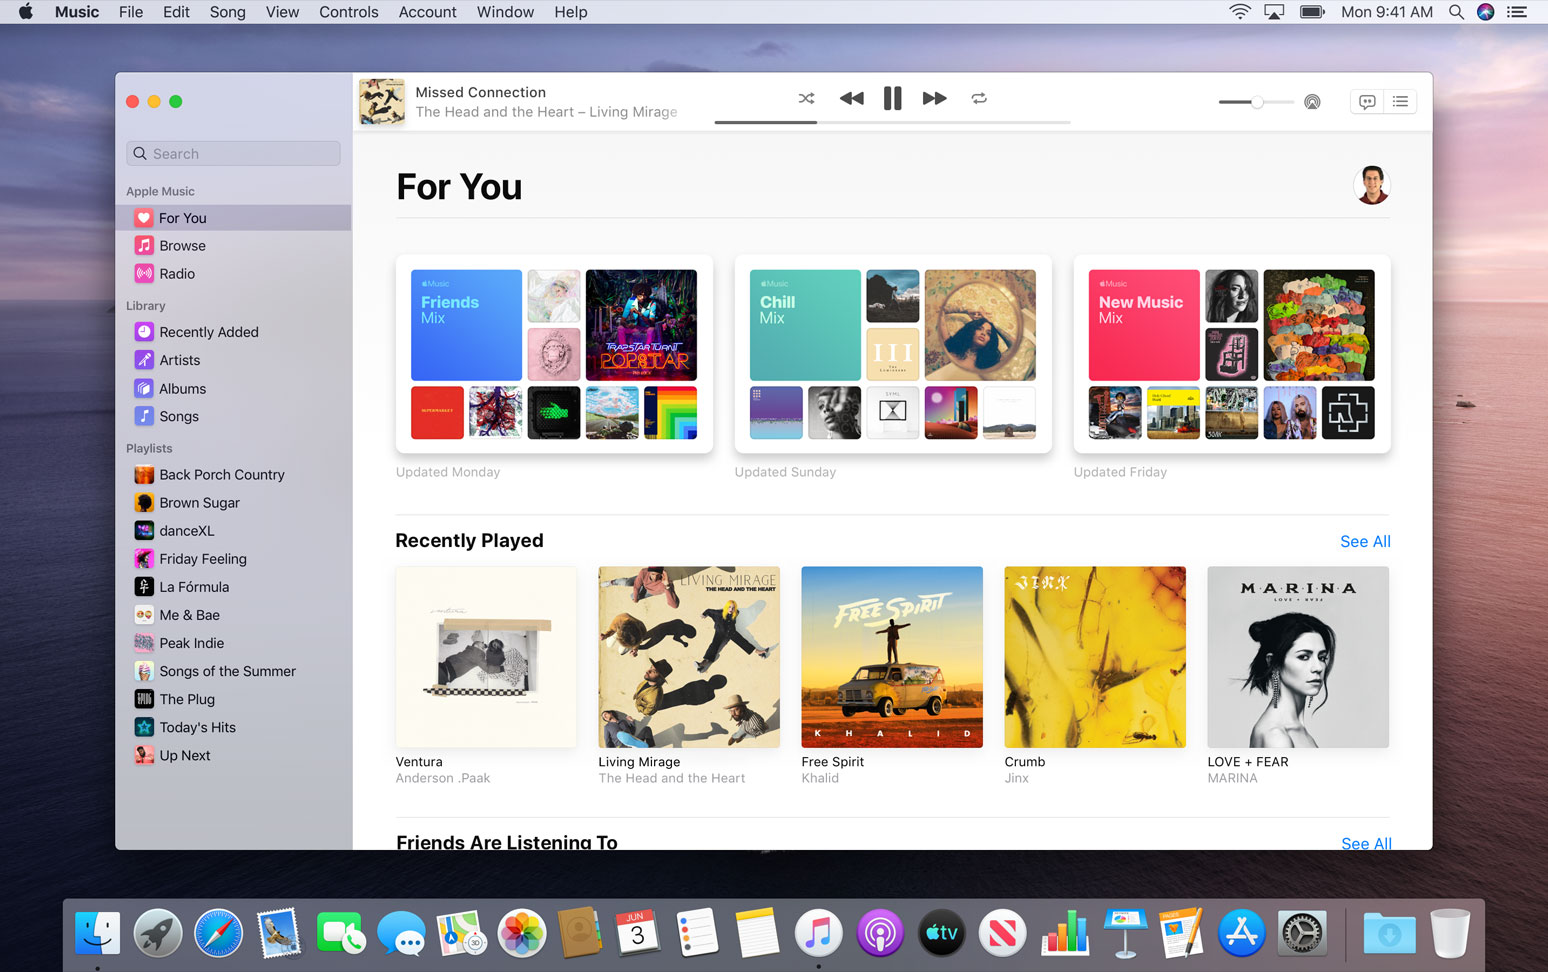 download itunes for mac os catalina 10.15.7